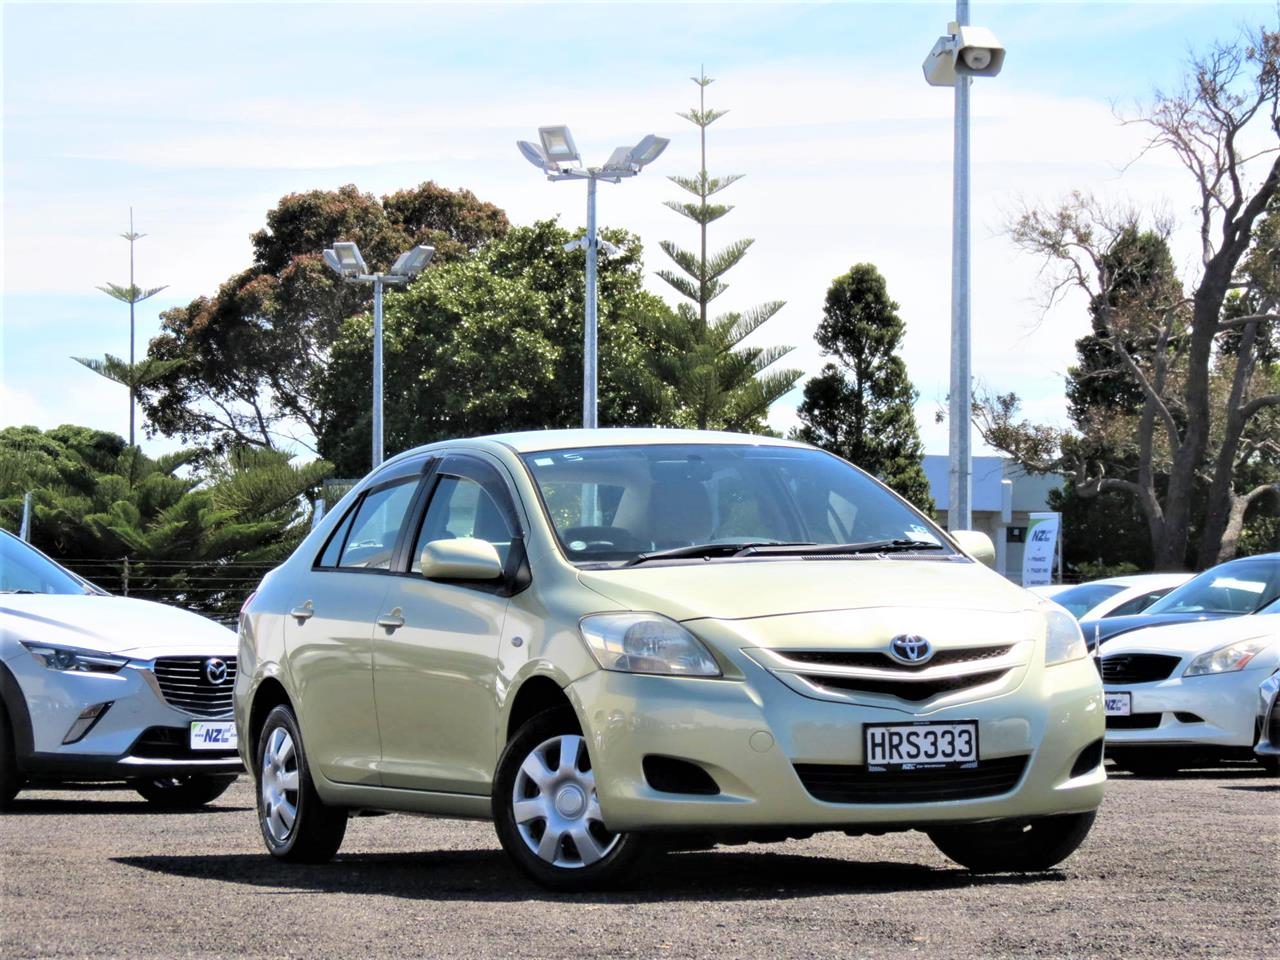 NZC 2006 Toyota Belta just arrived to Auckland